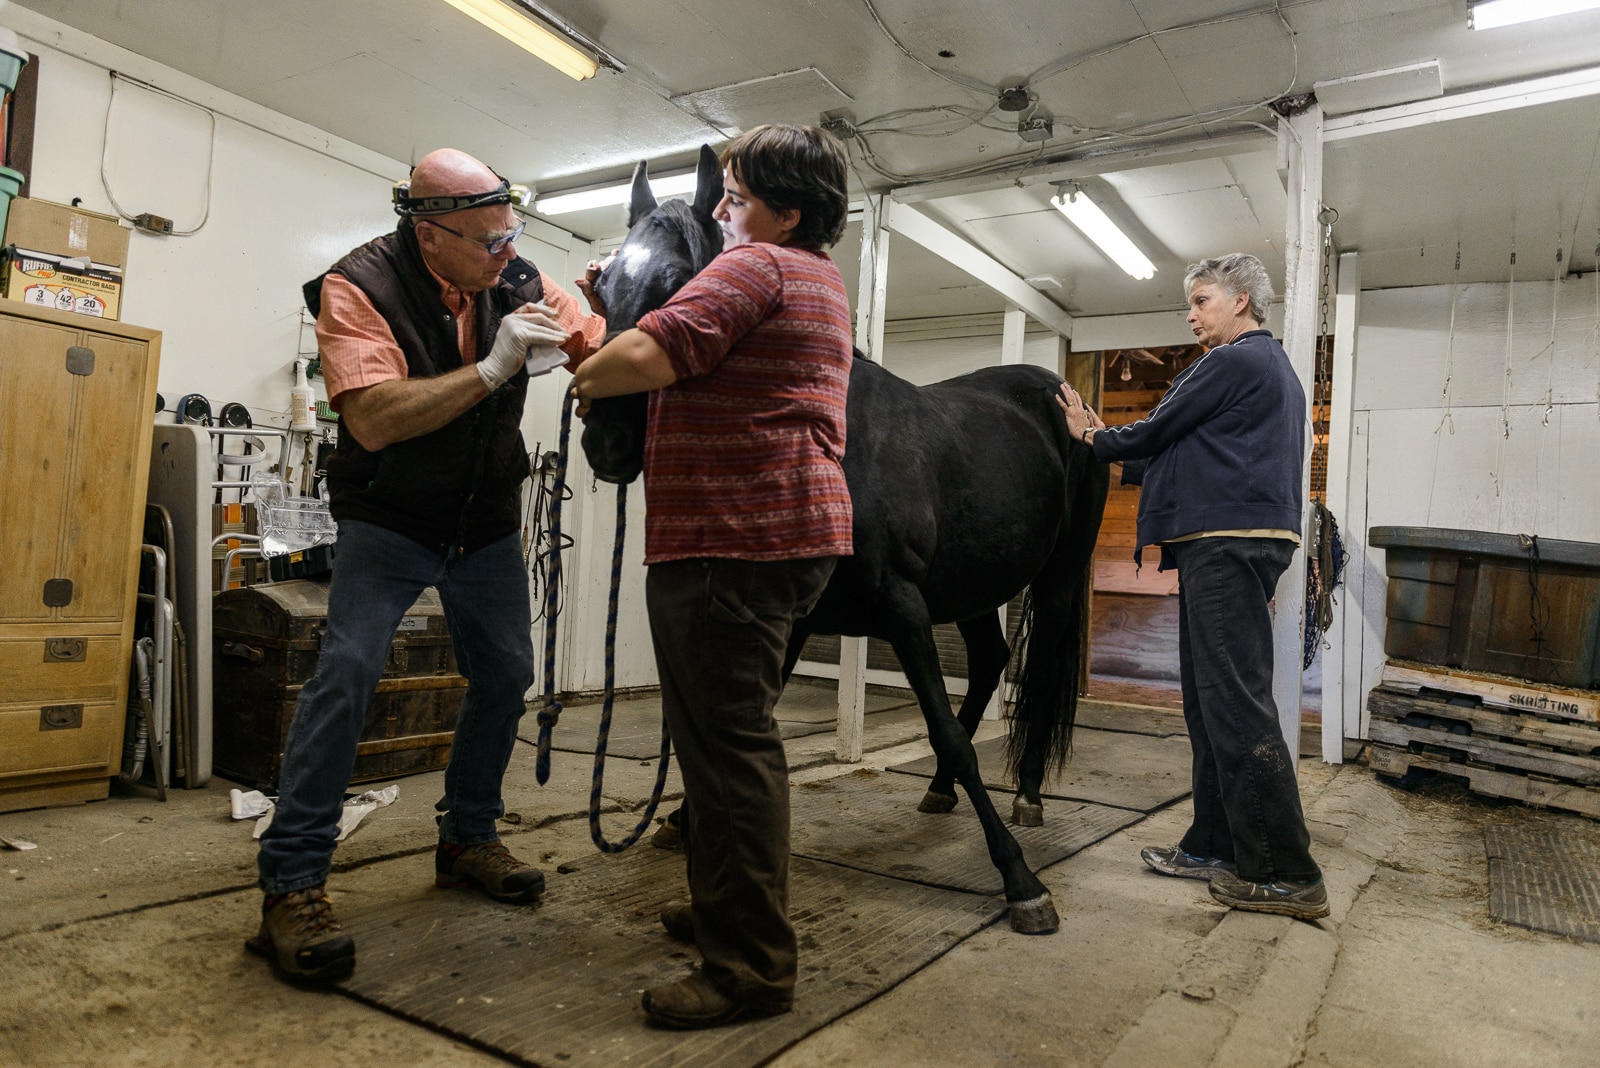 DVM Stuwe sews up the eyelid of a horse at Water Tower Farm in Marshfield, VT.